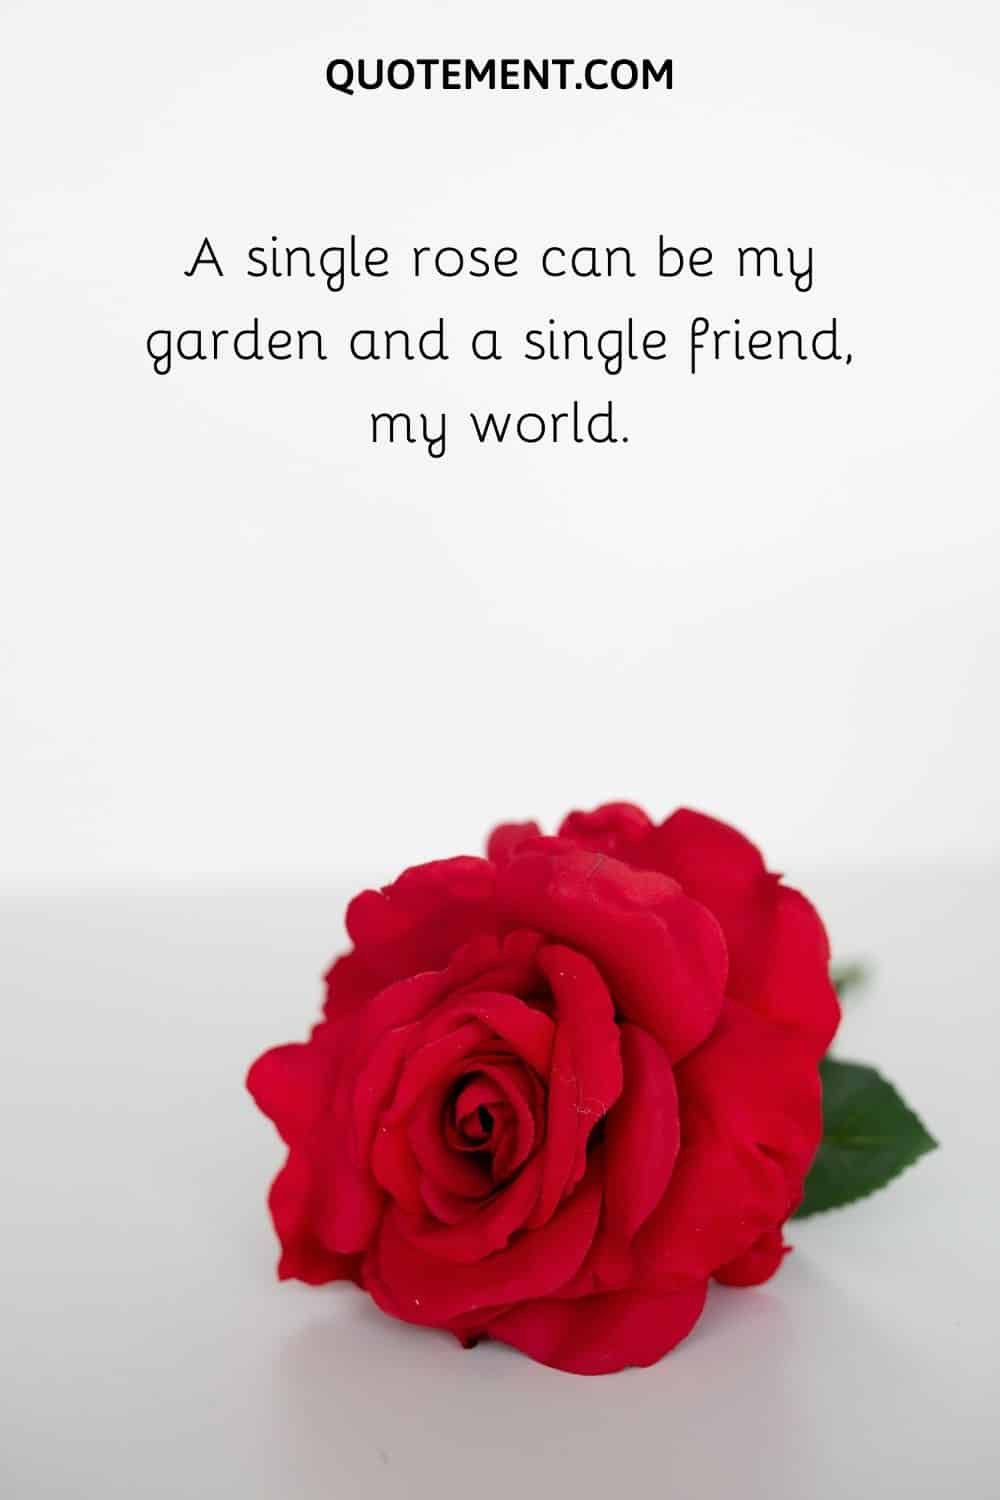 A single rose can be my garden and a single friend, my world.